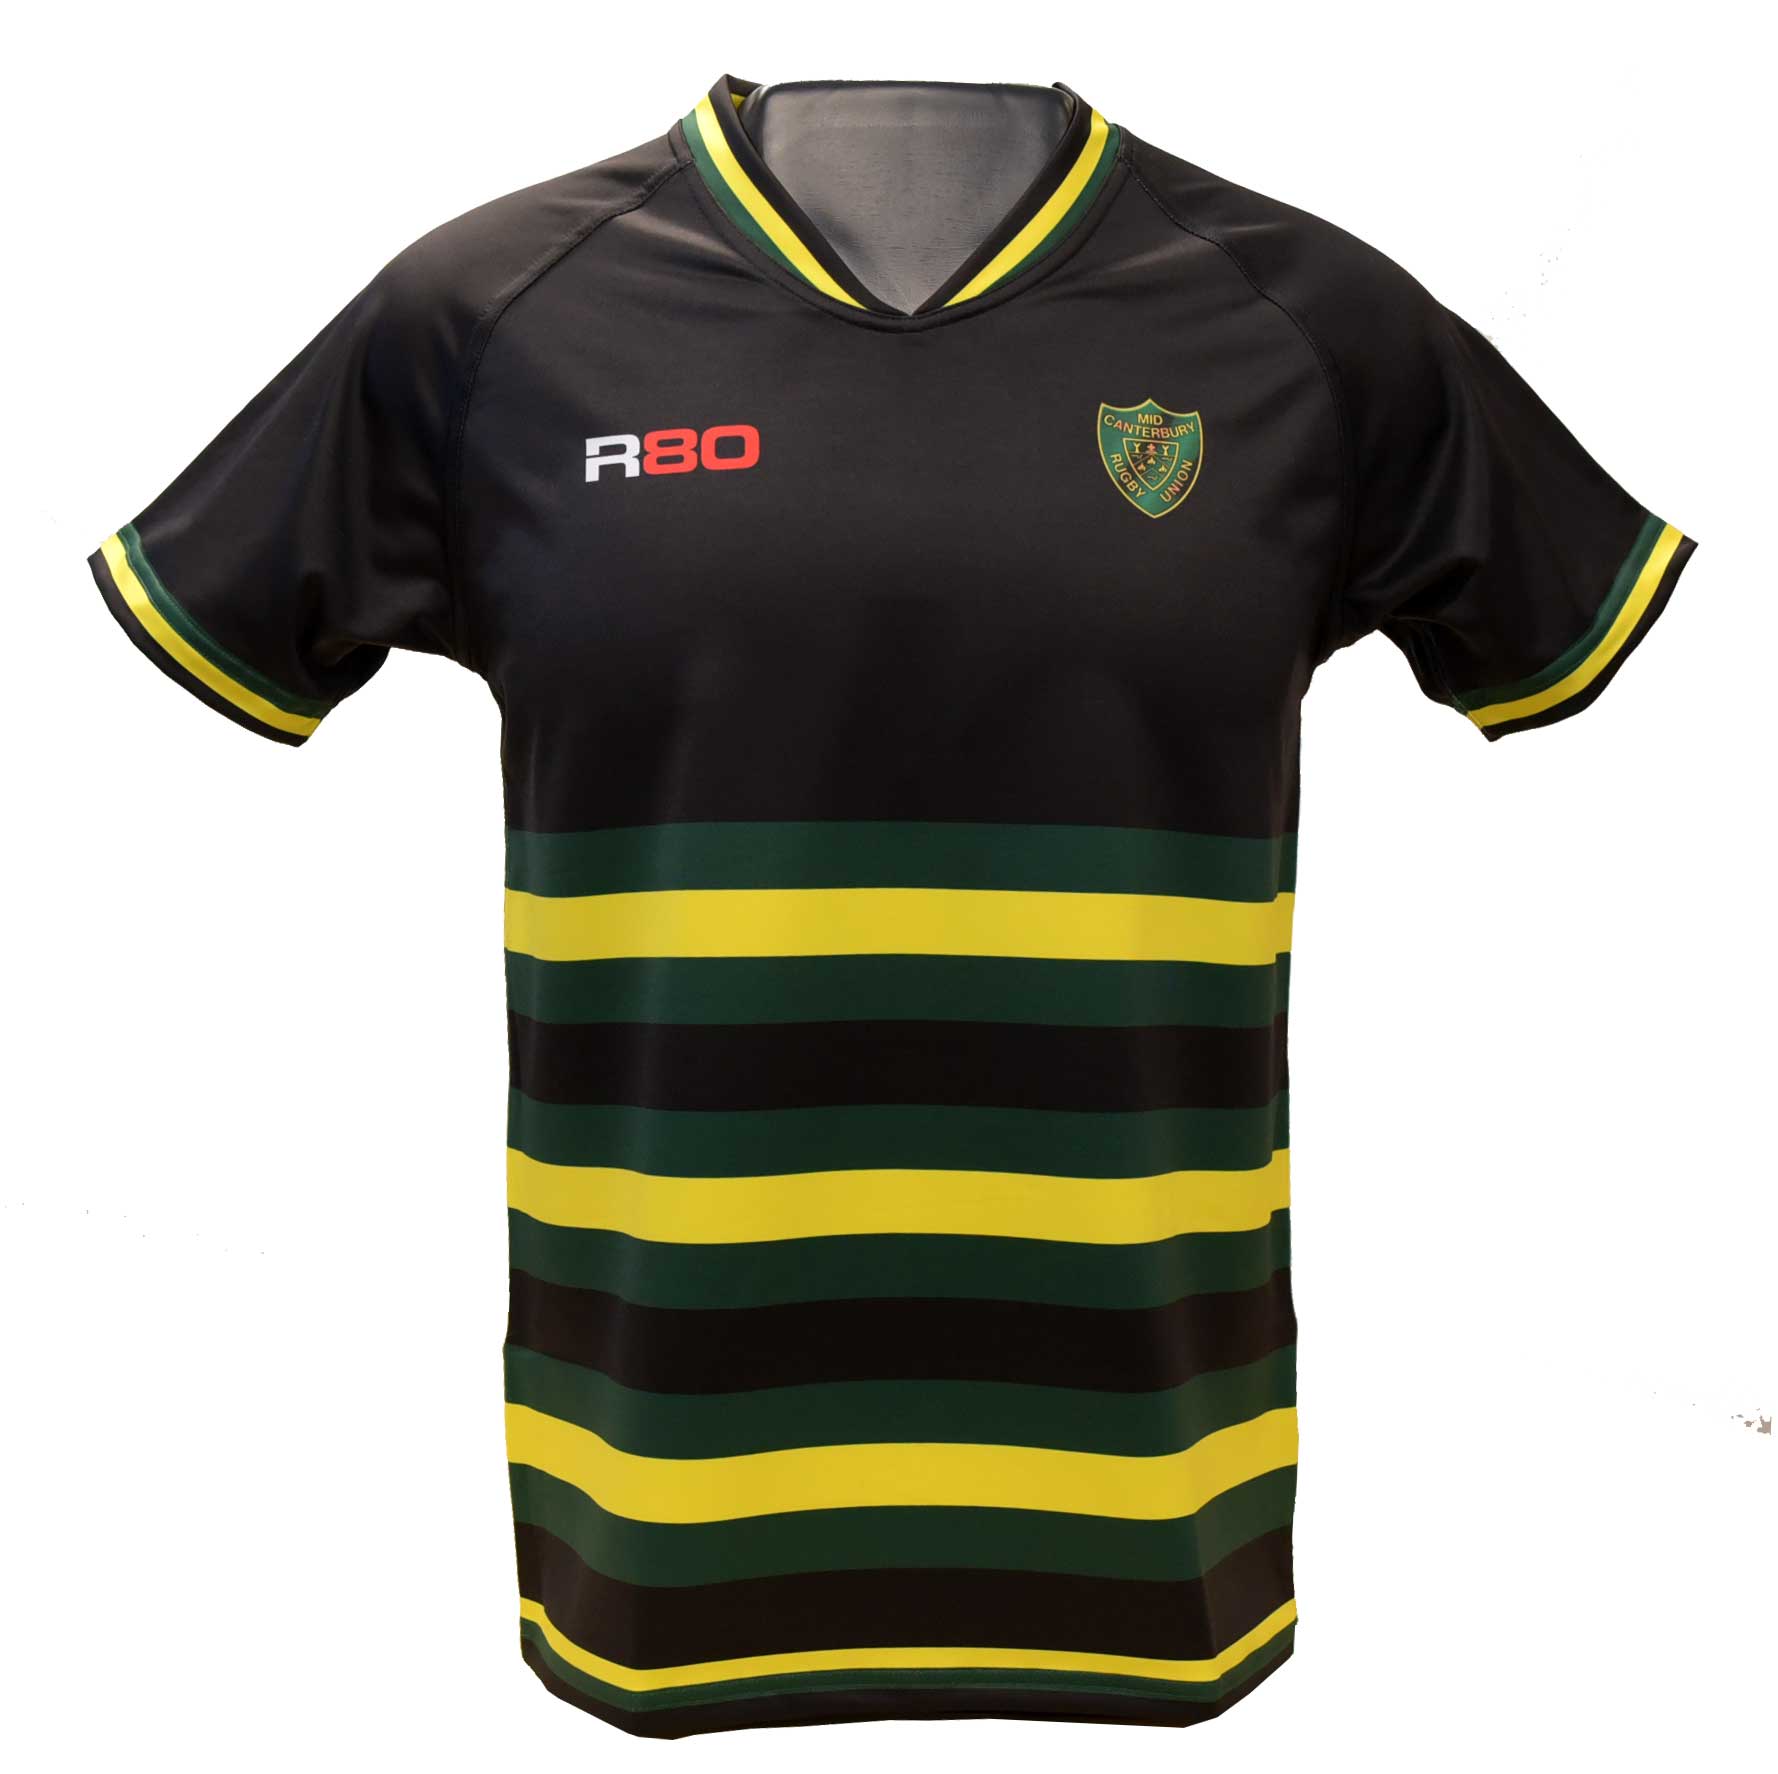 Junior Rugby Jerseys-R80RugbyWebsite-Speed Power Stability Systems Ltd (R80 Rugby)